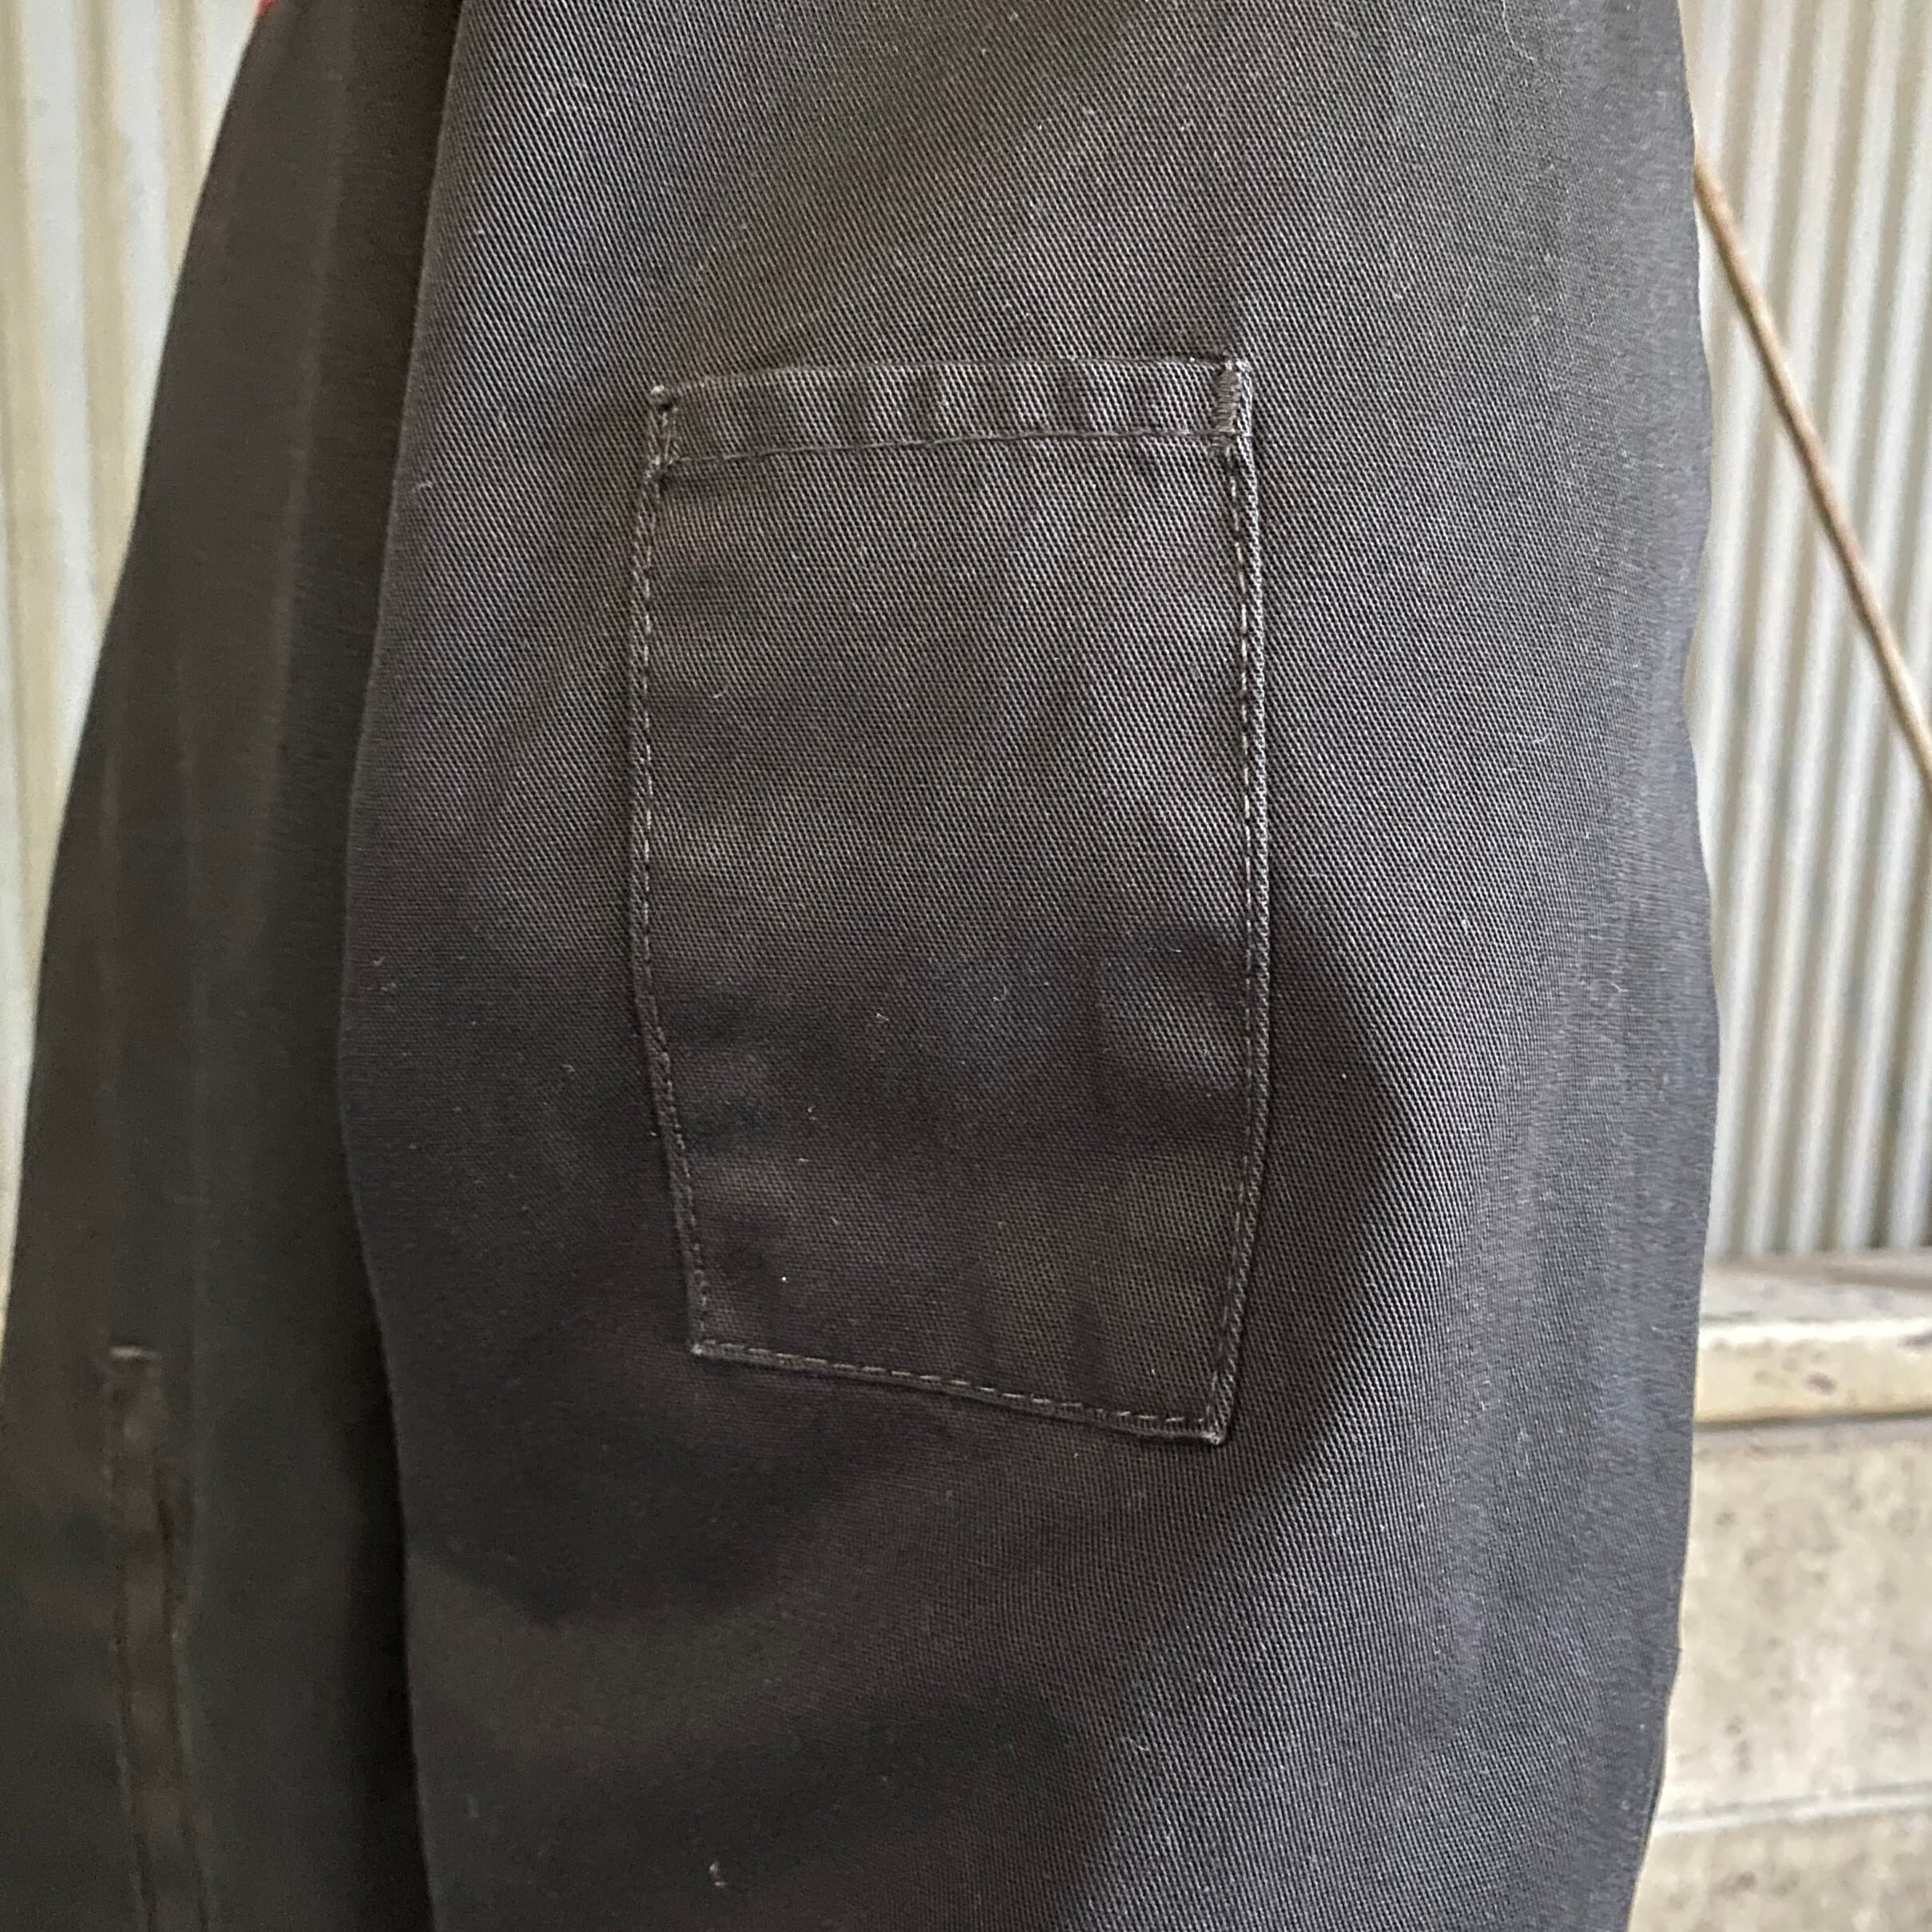 Dickies ディッキーズ 企業ロゴ刺繍 ワークジャケット メンズXL相当 古着 ブラック 黒  スイングトップタイプ【ワークジャケット】【3anniv】 | cave 古着屋【公式】古着通販サイト powered by BASE